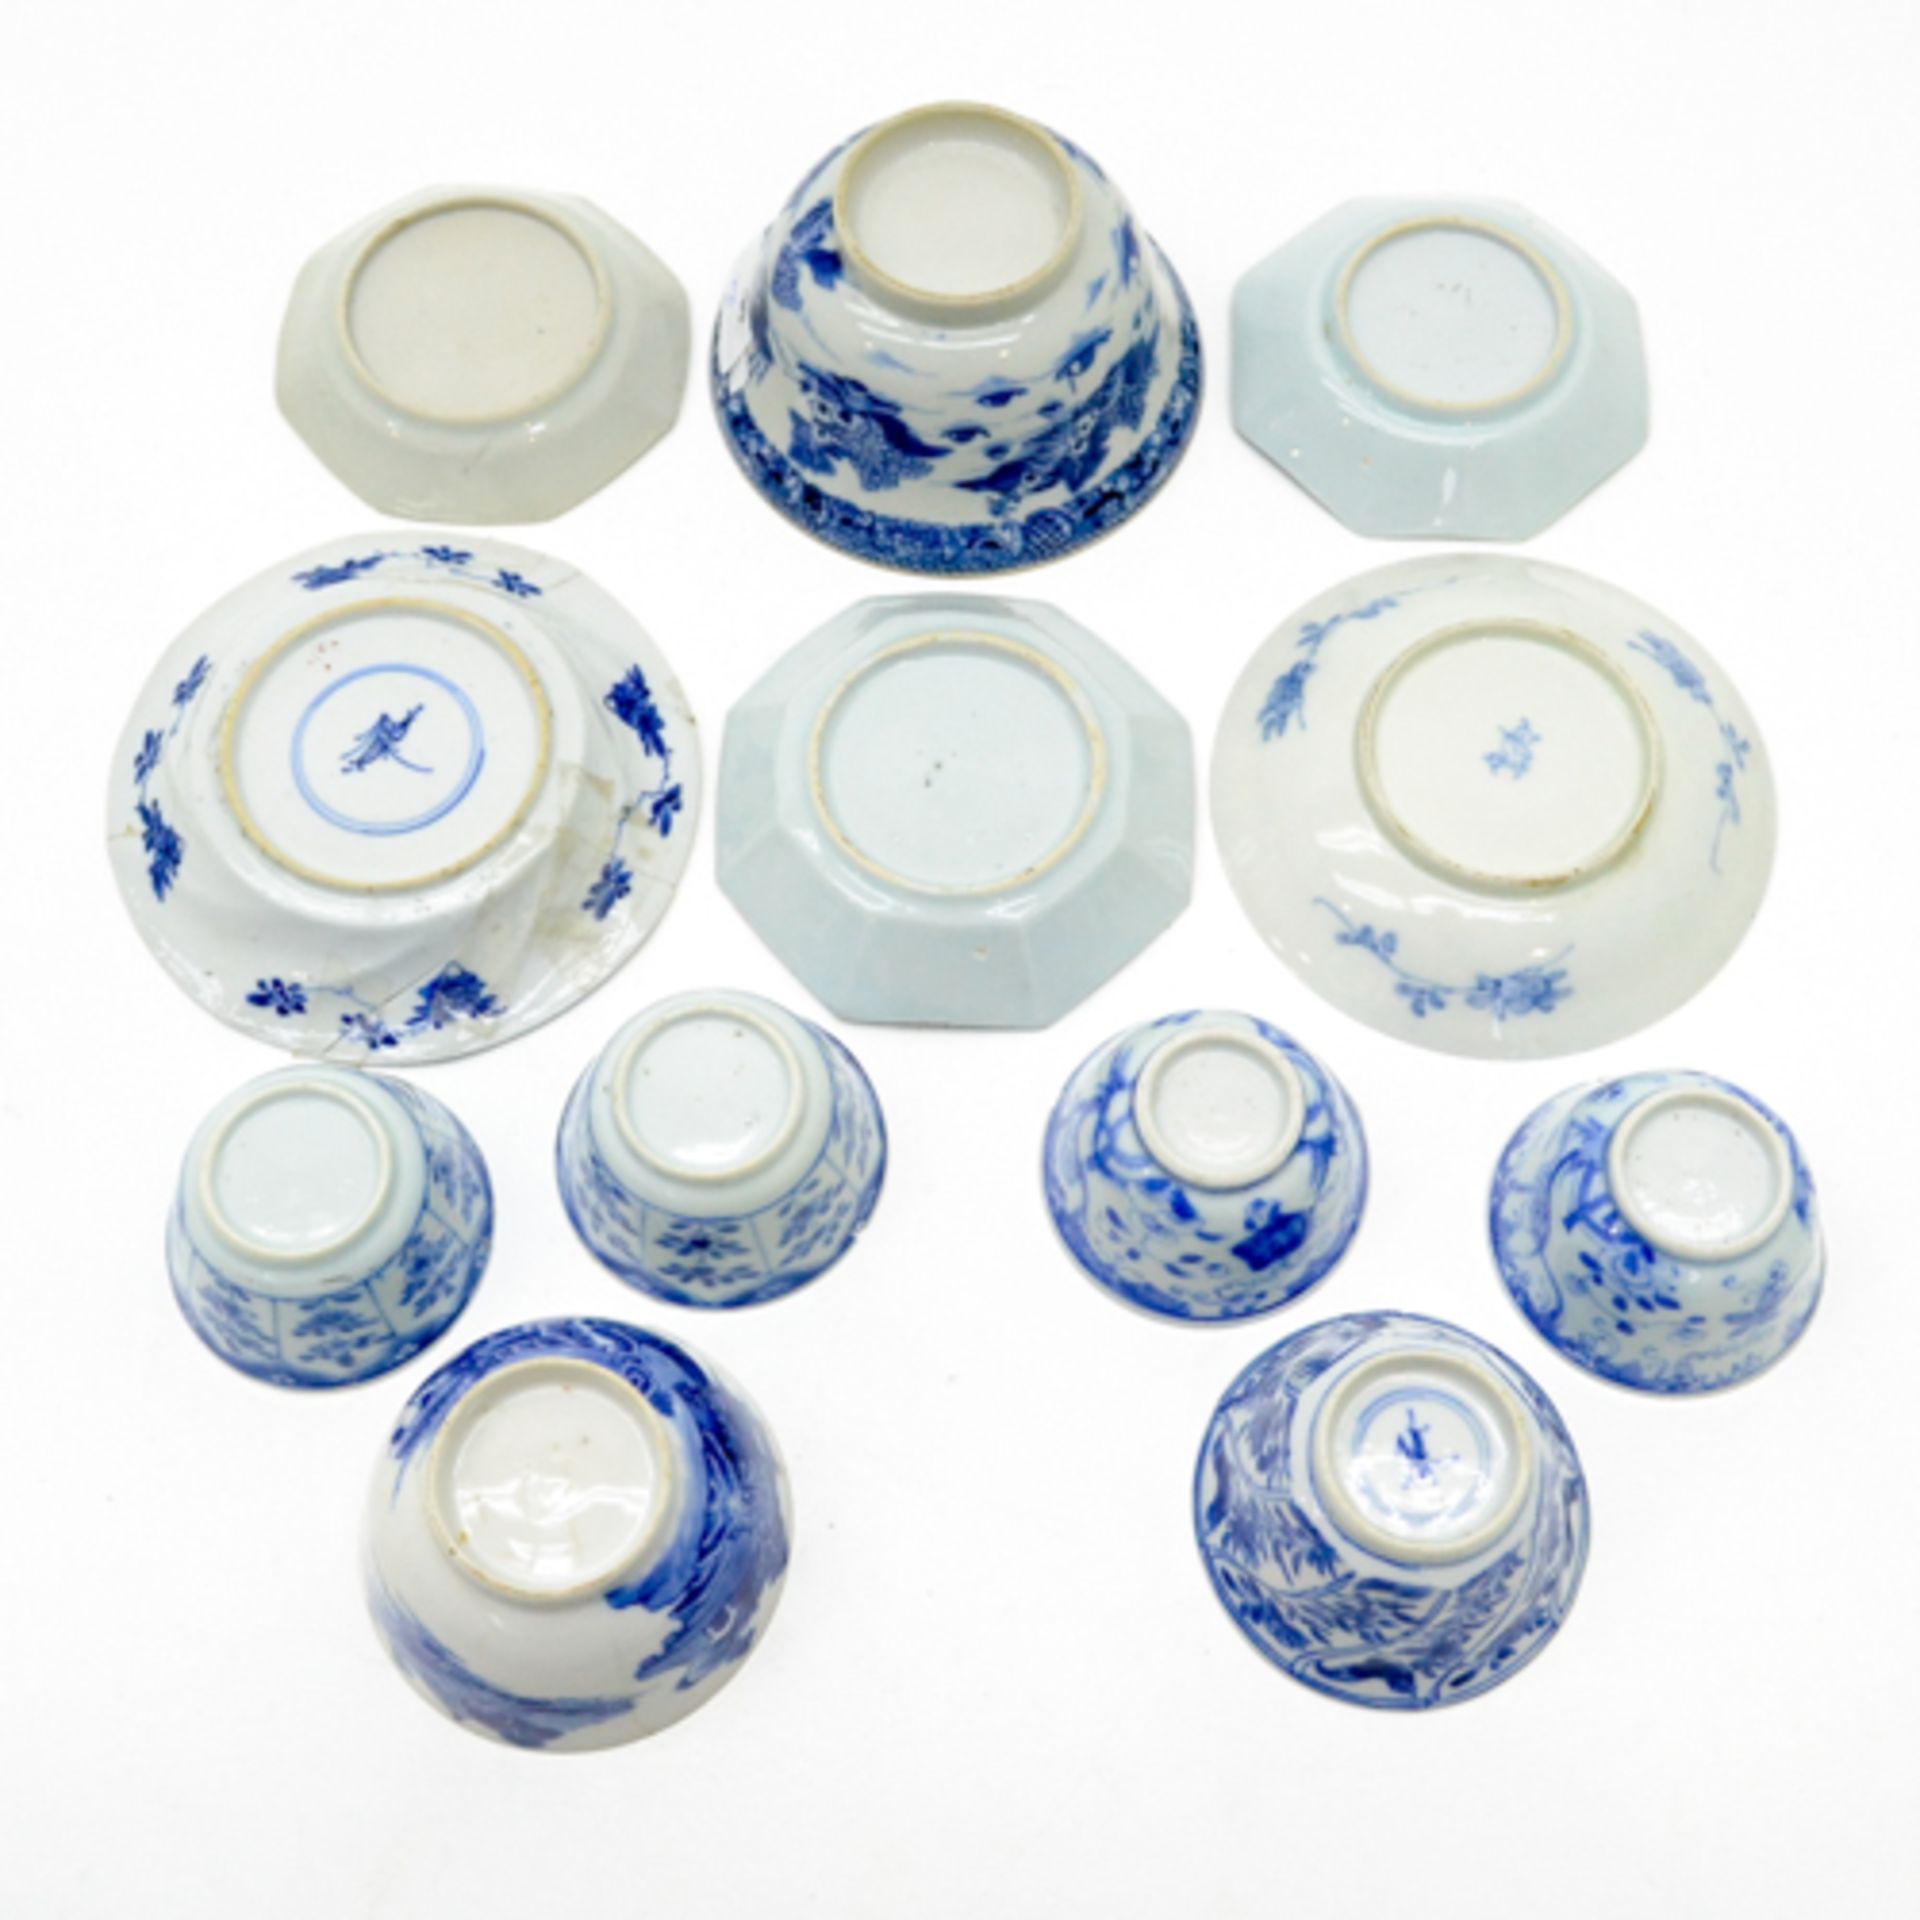 LOT OF 12 CHINA PORCELAIN PLATES Largest is 13 cm in diameter, in diverse conditions. - Bild 3 aus 3